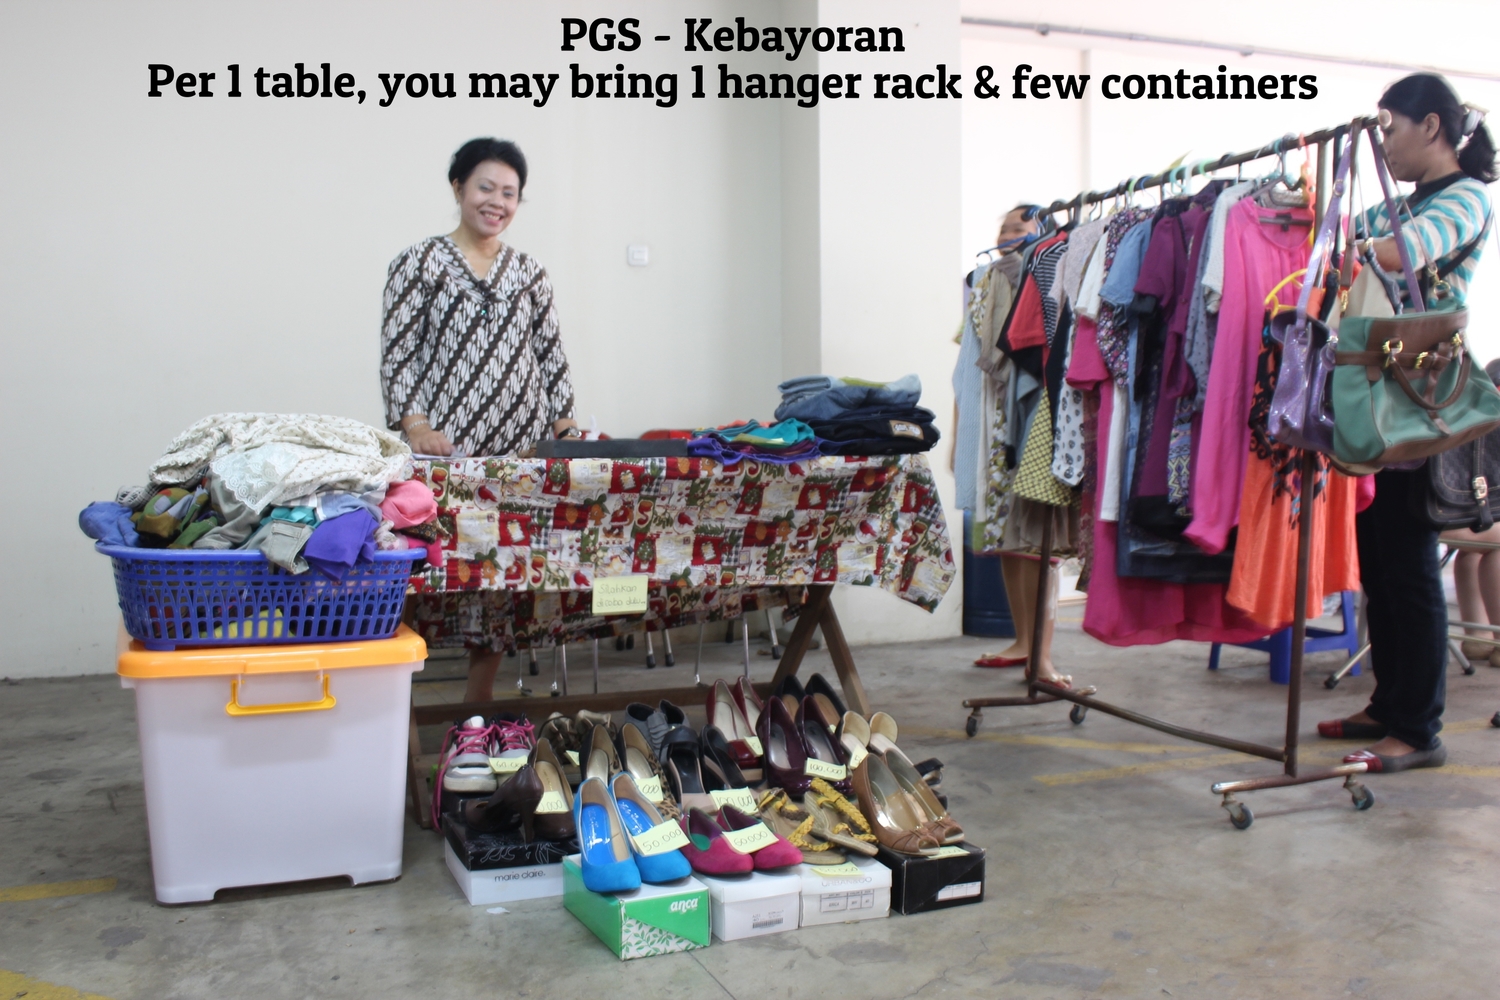  PGS - Kebayoran  Per 1 table, you may bring 1 hanger rack and a few containers 